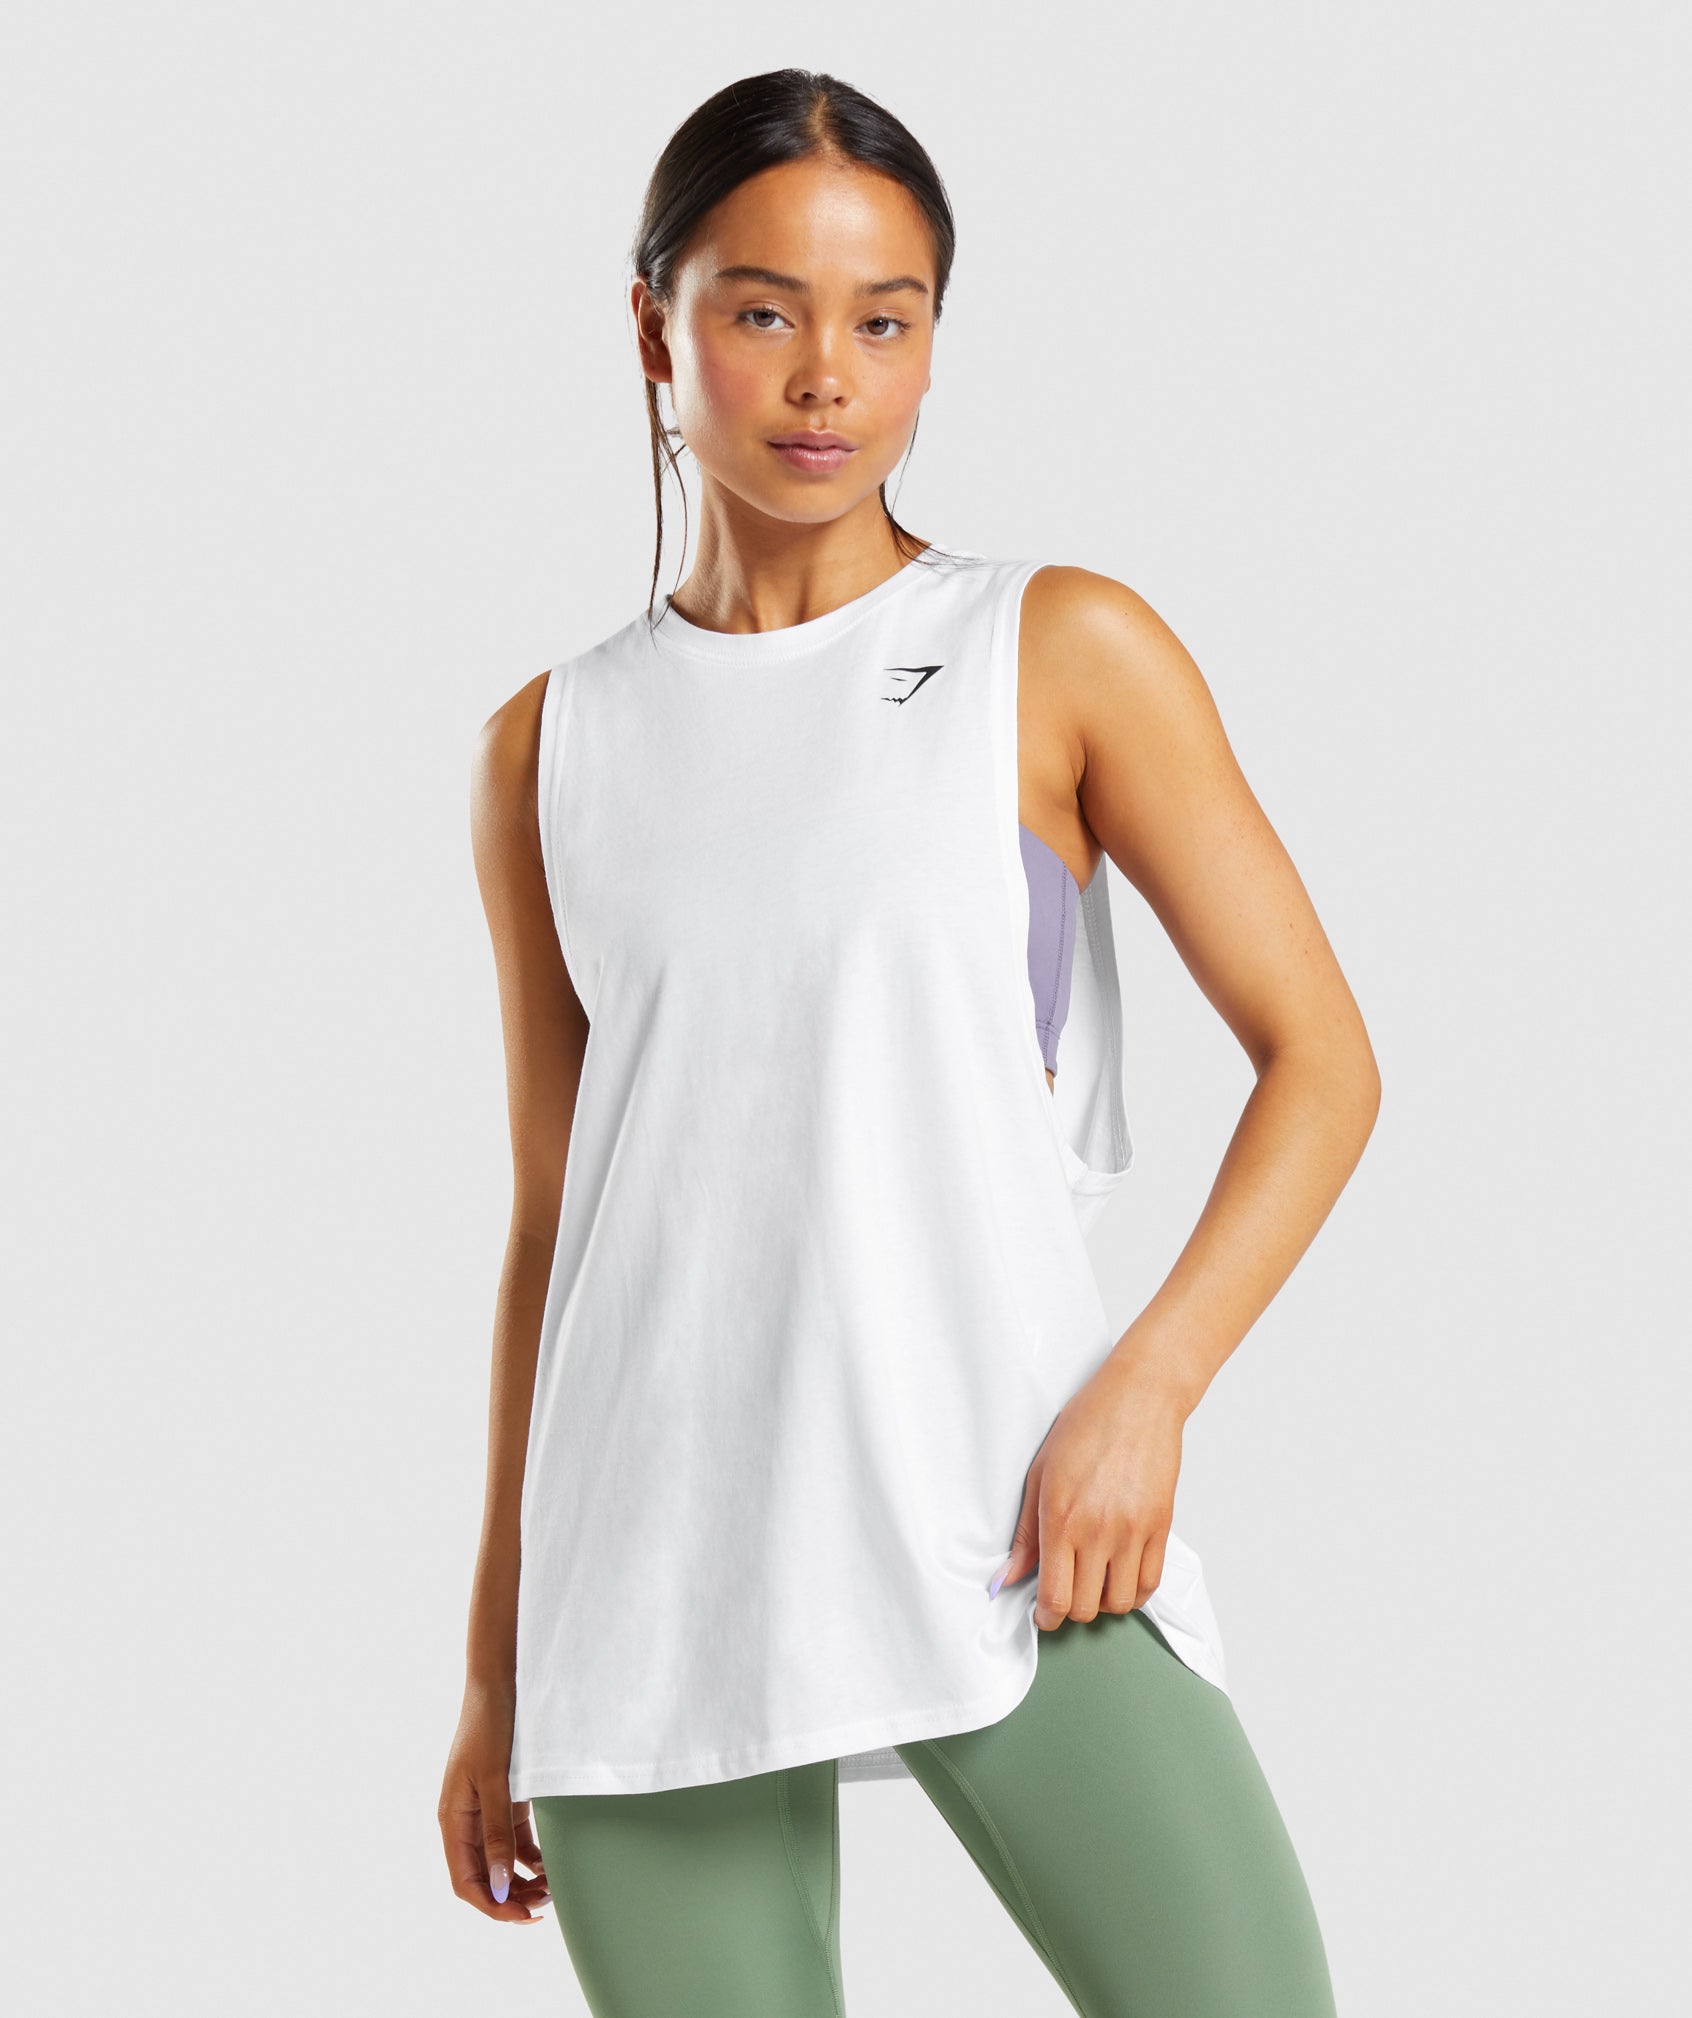 Training Drop Arm Tank in White - view 1